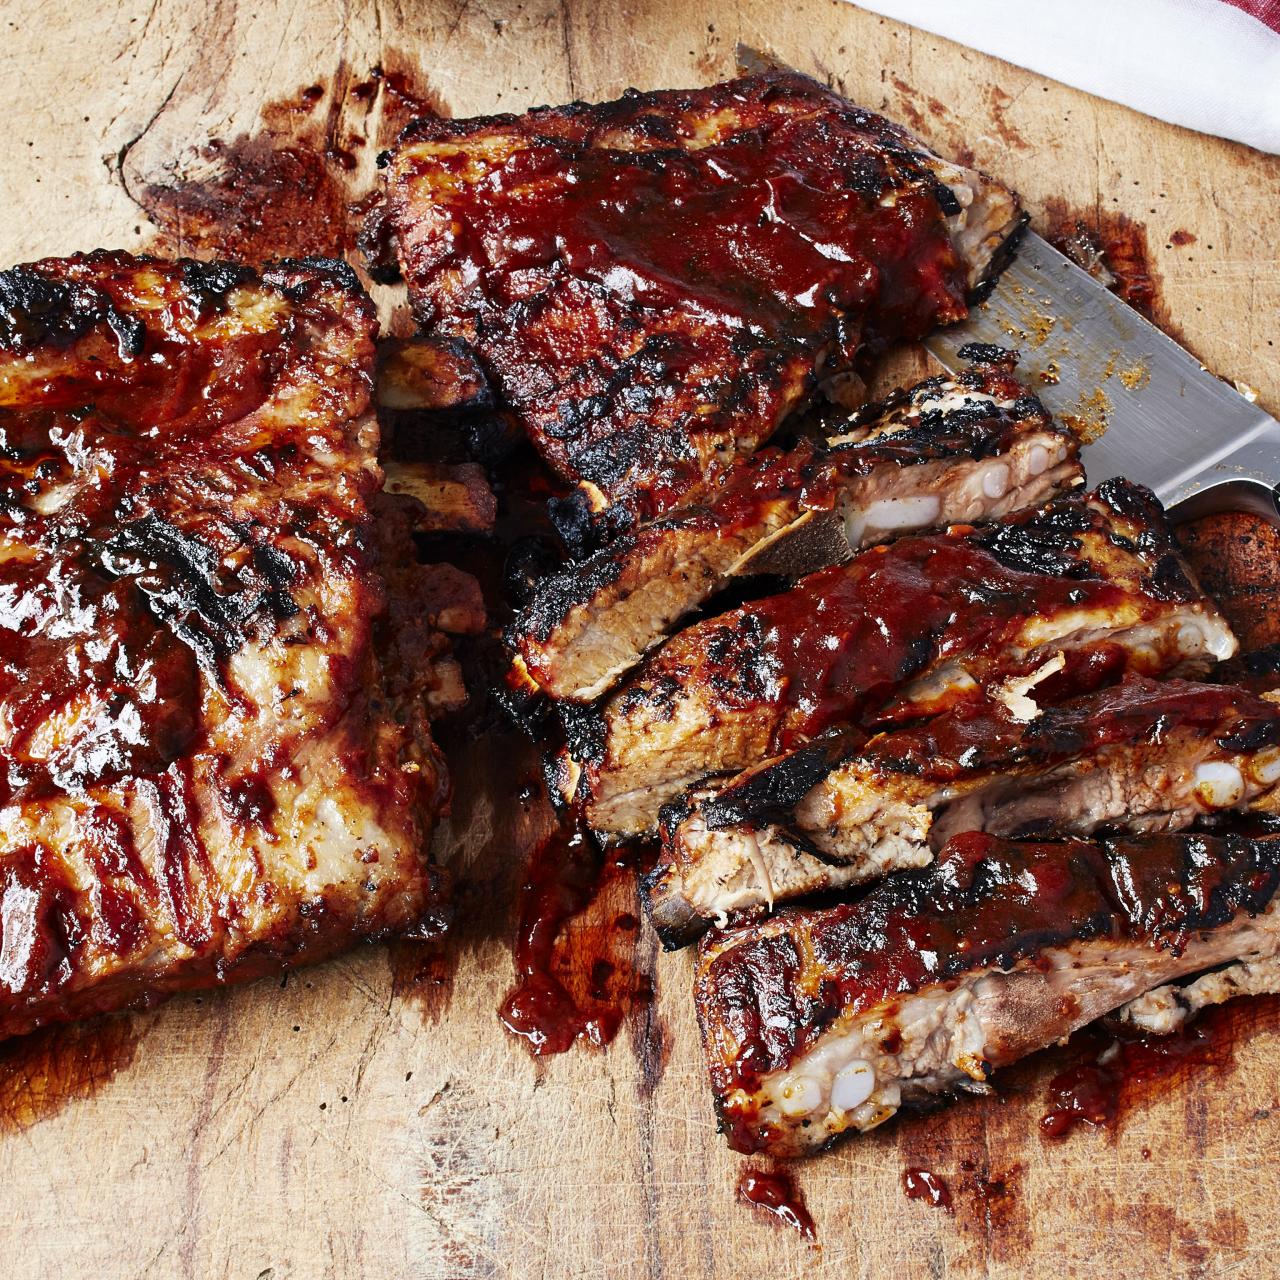 https://food.fnr.sndimg.com/content/dam/images/food/fullset/2015/5/5/0/FNM_060115-Foolproof-Ribs-with-Barbecue-Sauce-Recipe_s4x3.jpg.rend.hgtvcom.1280.1280.suffix/1431453115262.jpeg